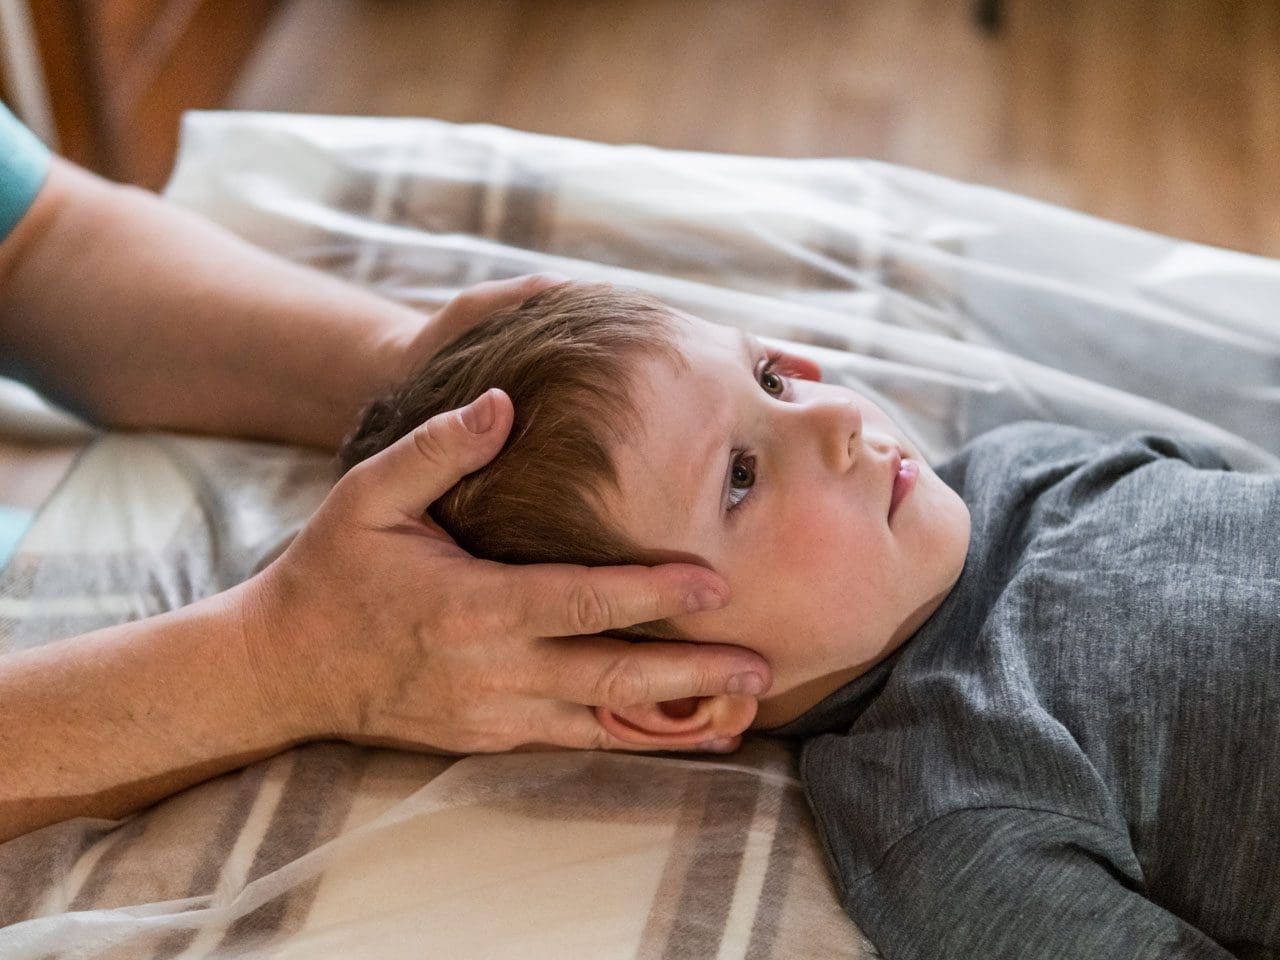 11860 Vista Del Sol, Ste. 128 Spinal Meningitis Can Affect the Spine: What to Know